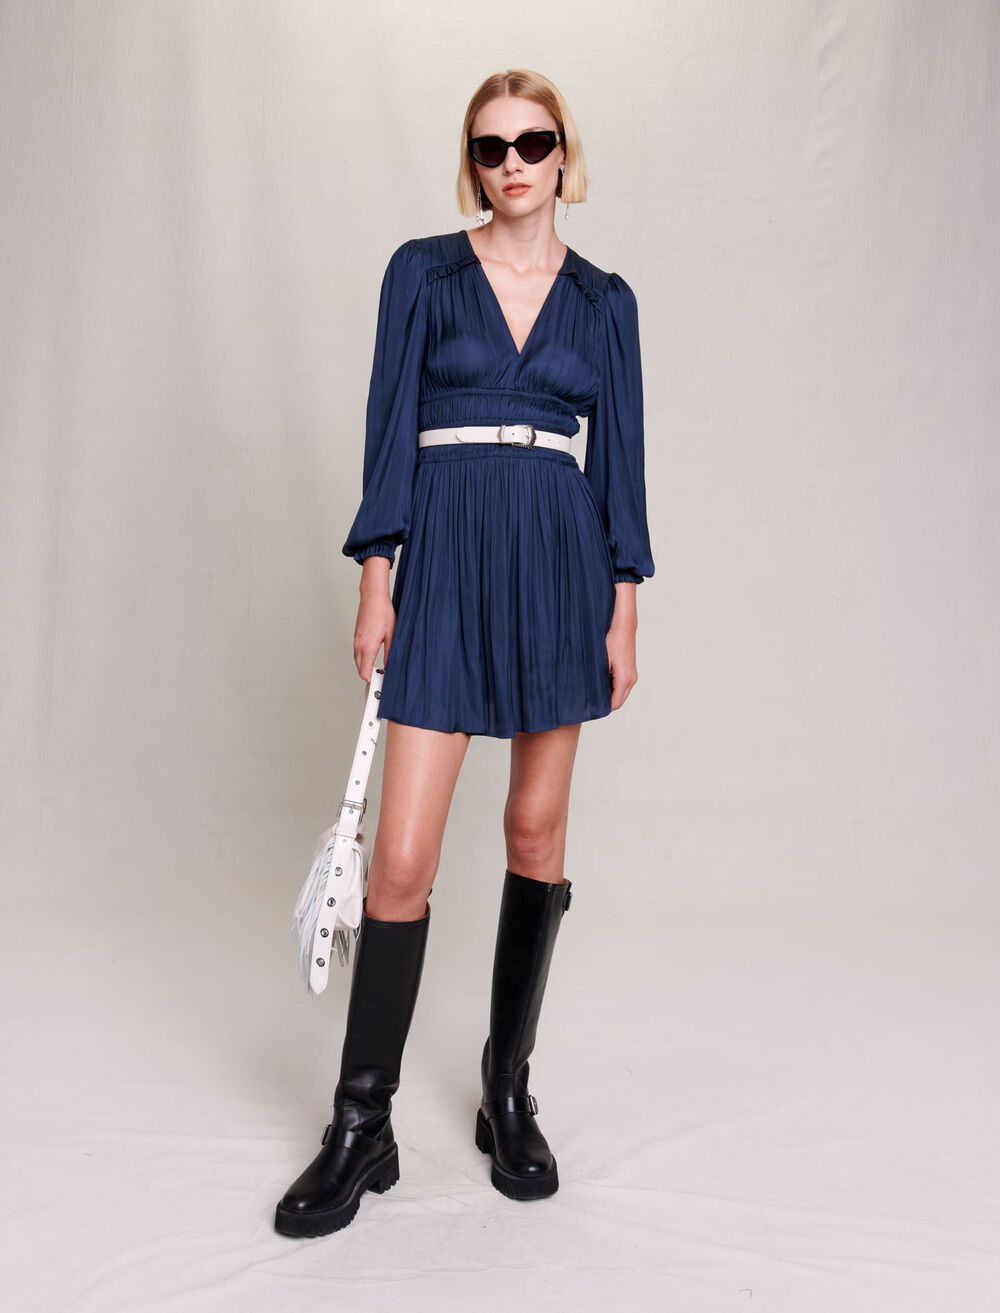 Navy featured SATIN DRESS WITH RUFFLES